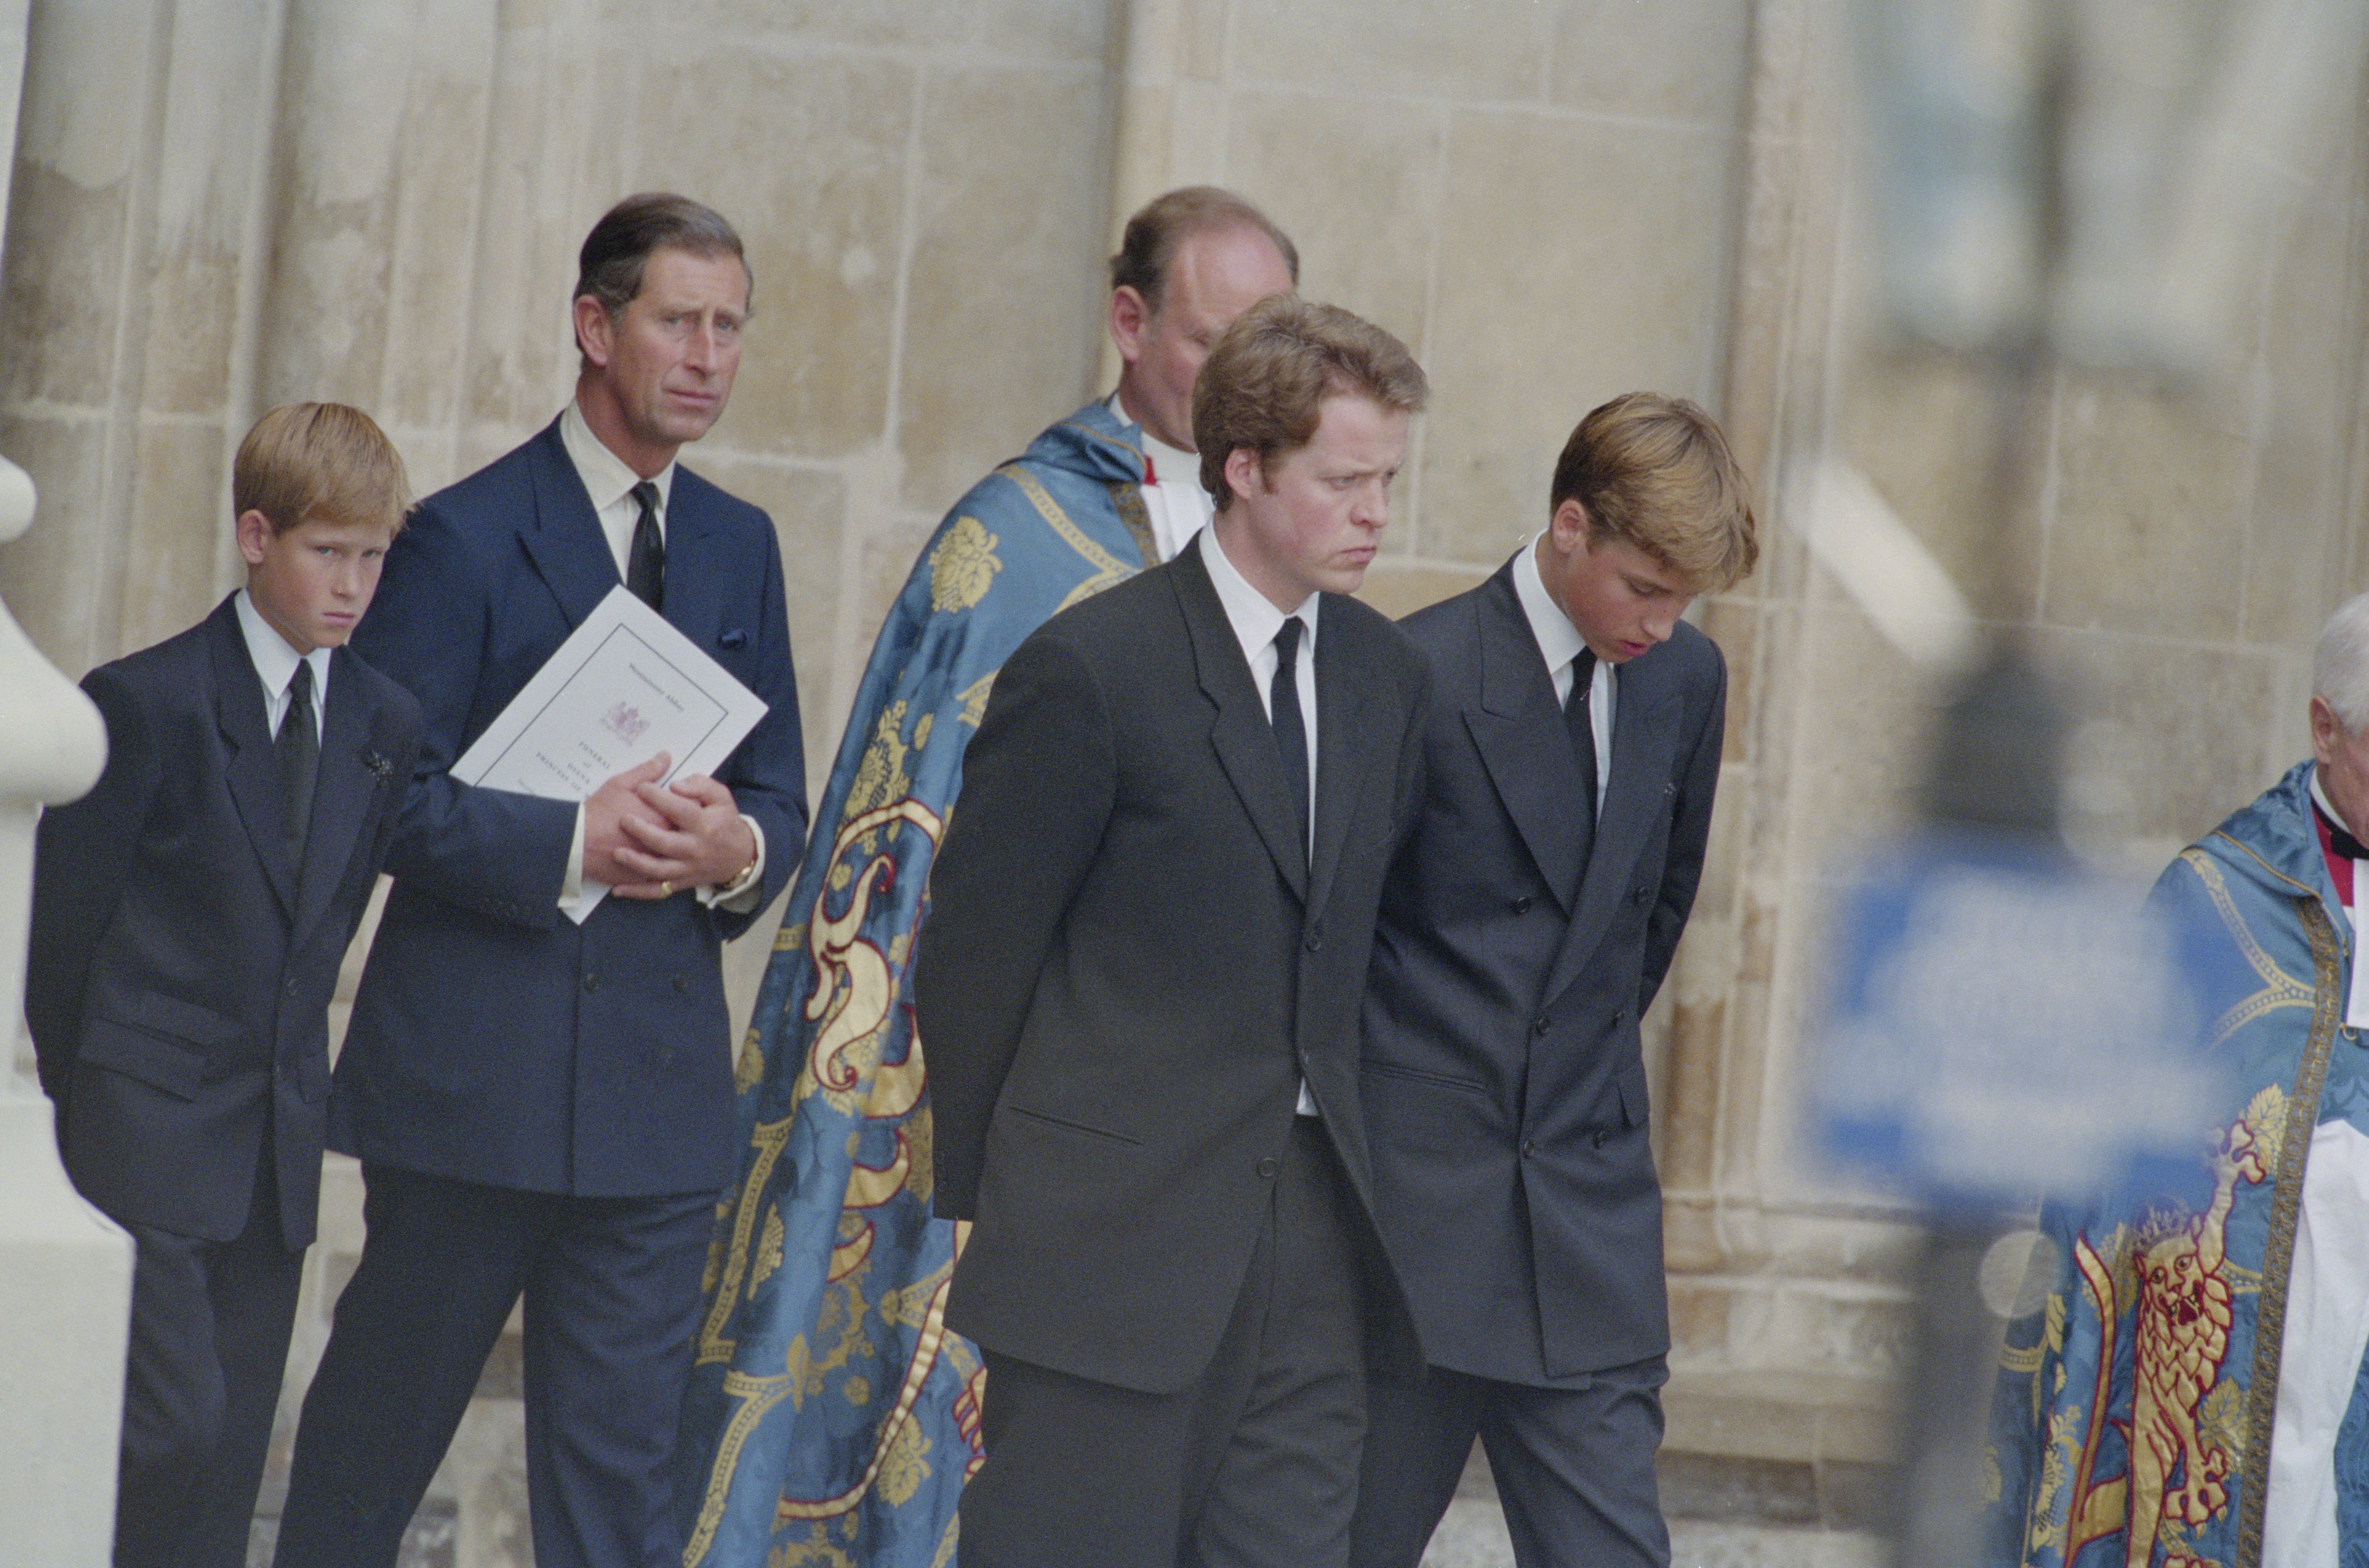 Prince Harry, Prince Charles, Earl Spencer, and Prince William at Westminster Abbey for the funeral service for Princess Diana on September 6, 1997 | Source: Getty Images